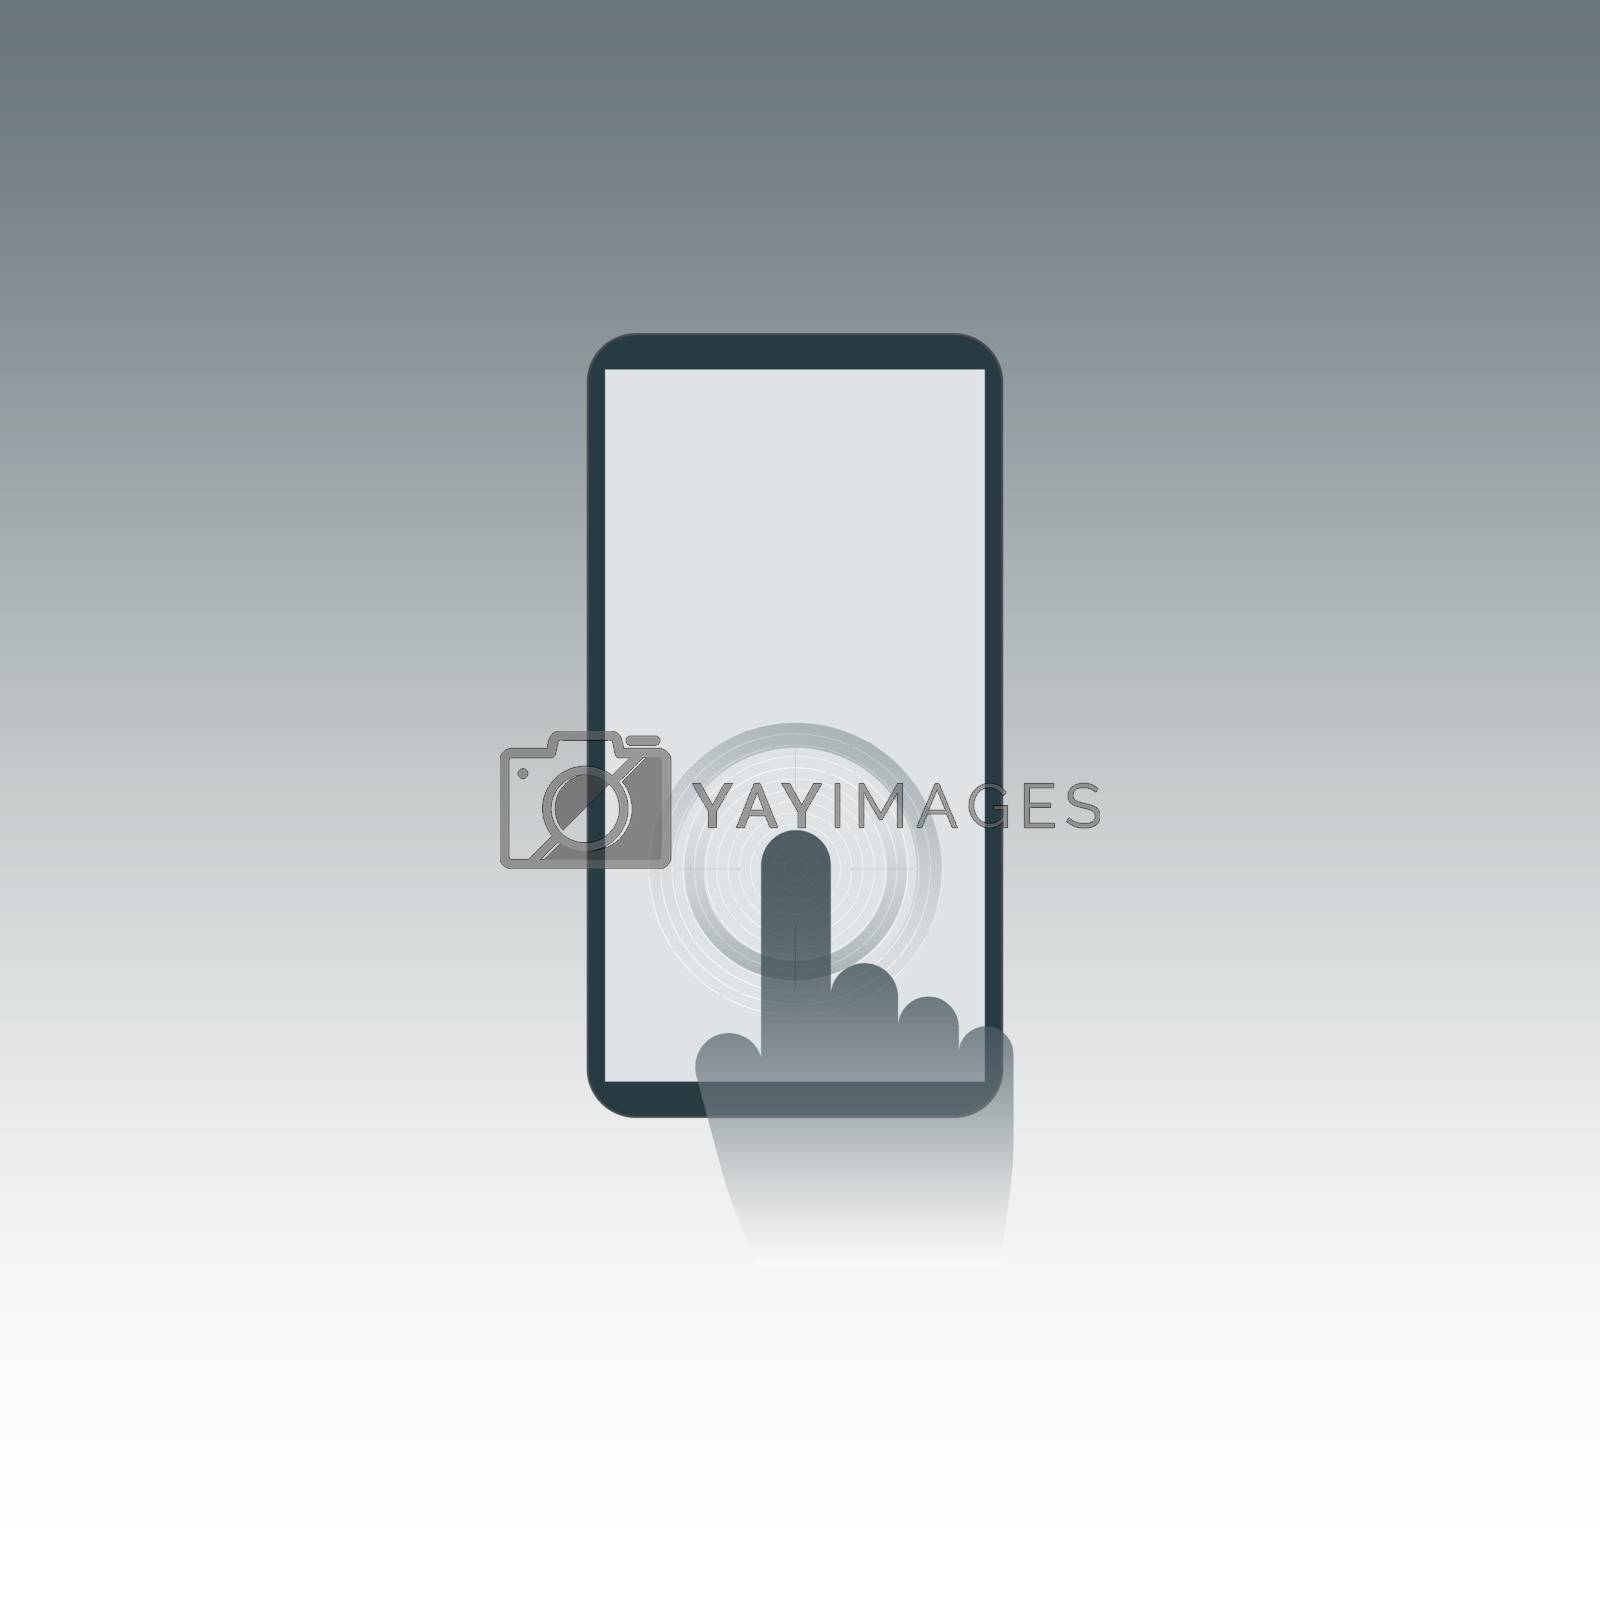 Royalty free image of TouchScreen by Chiamsakul